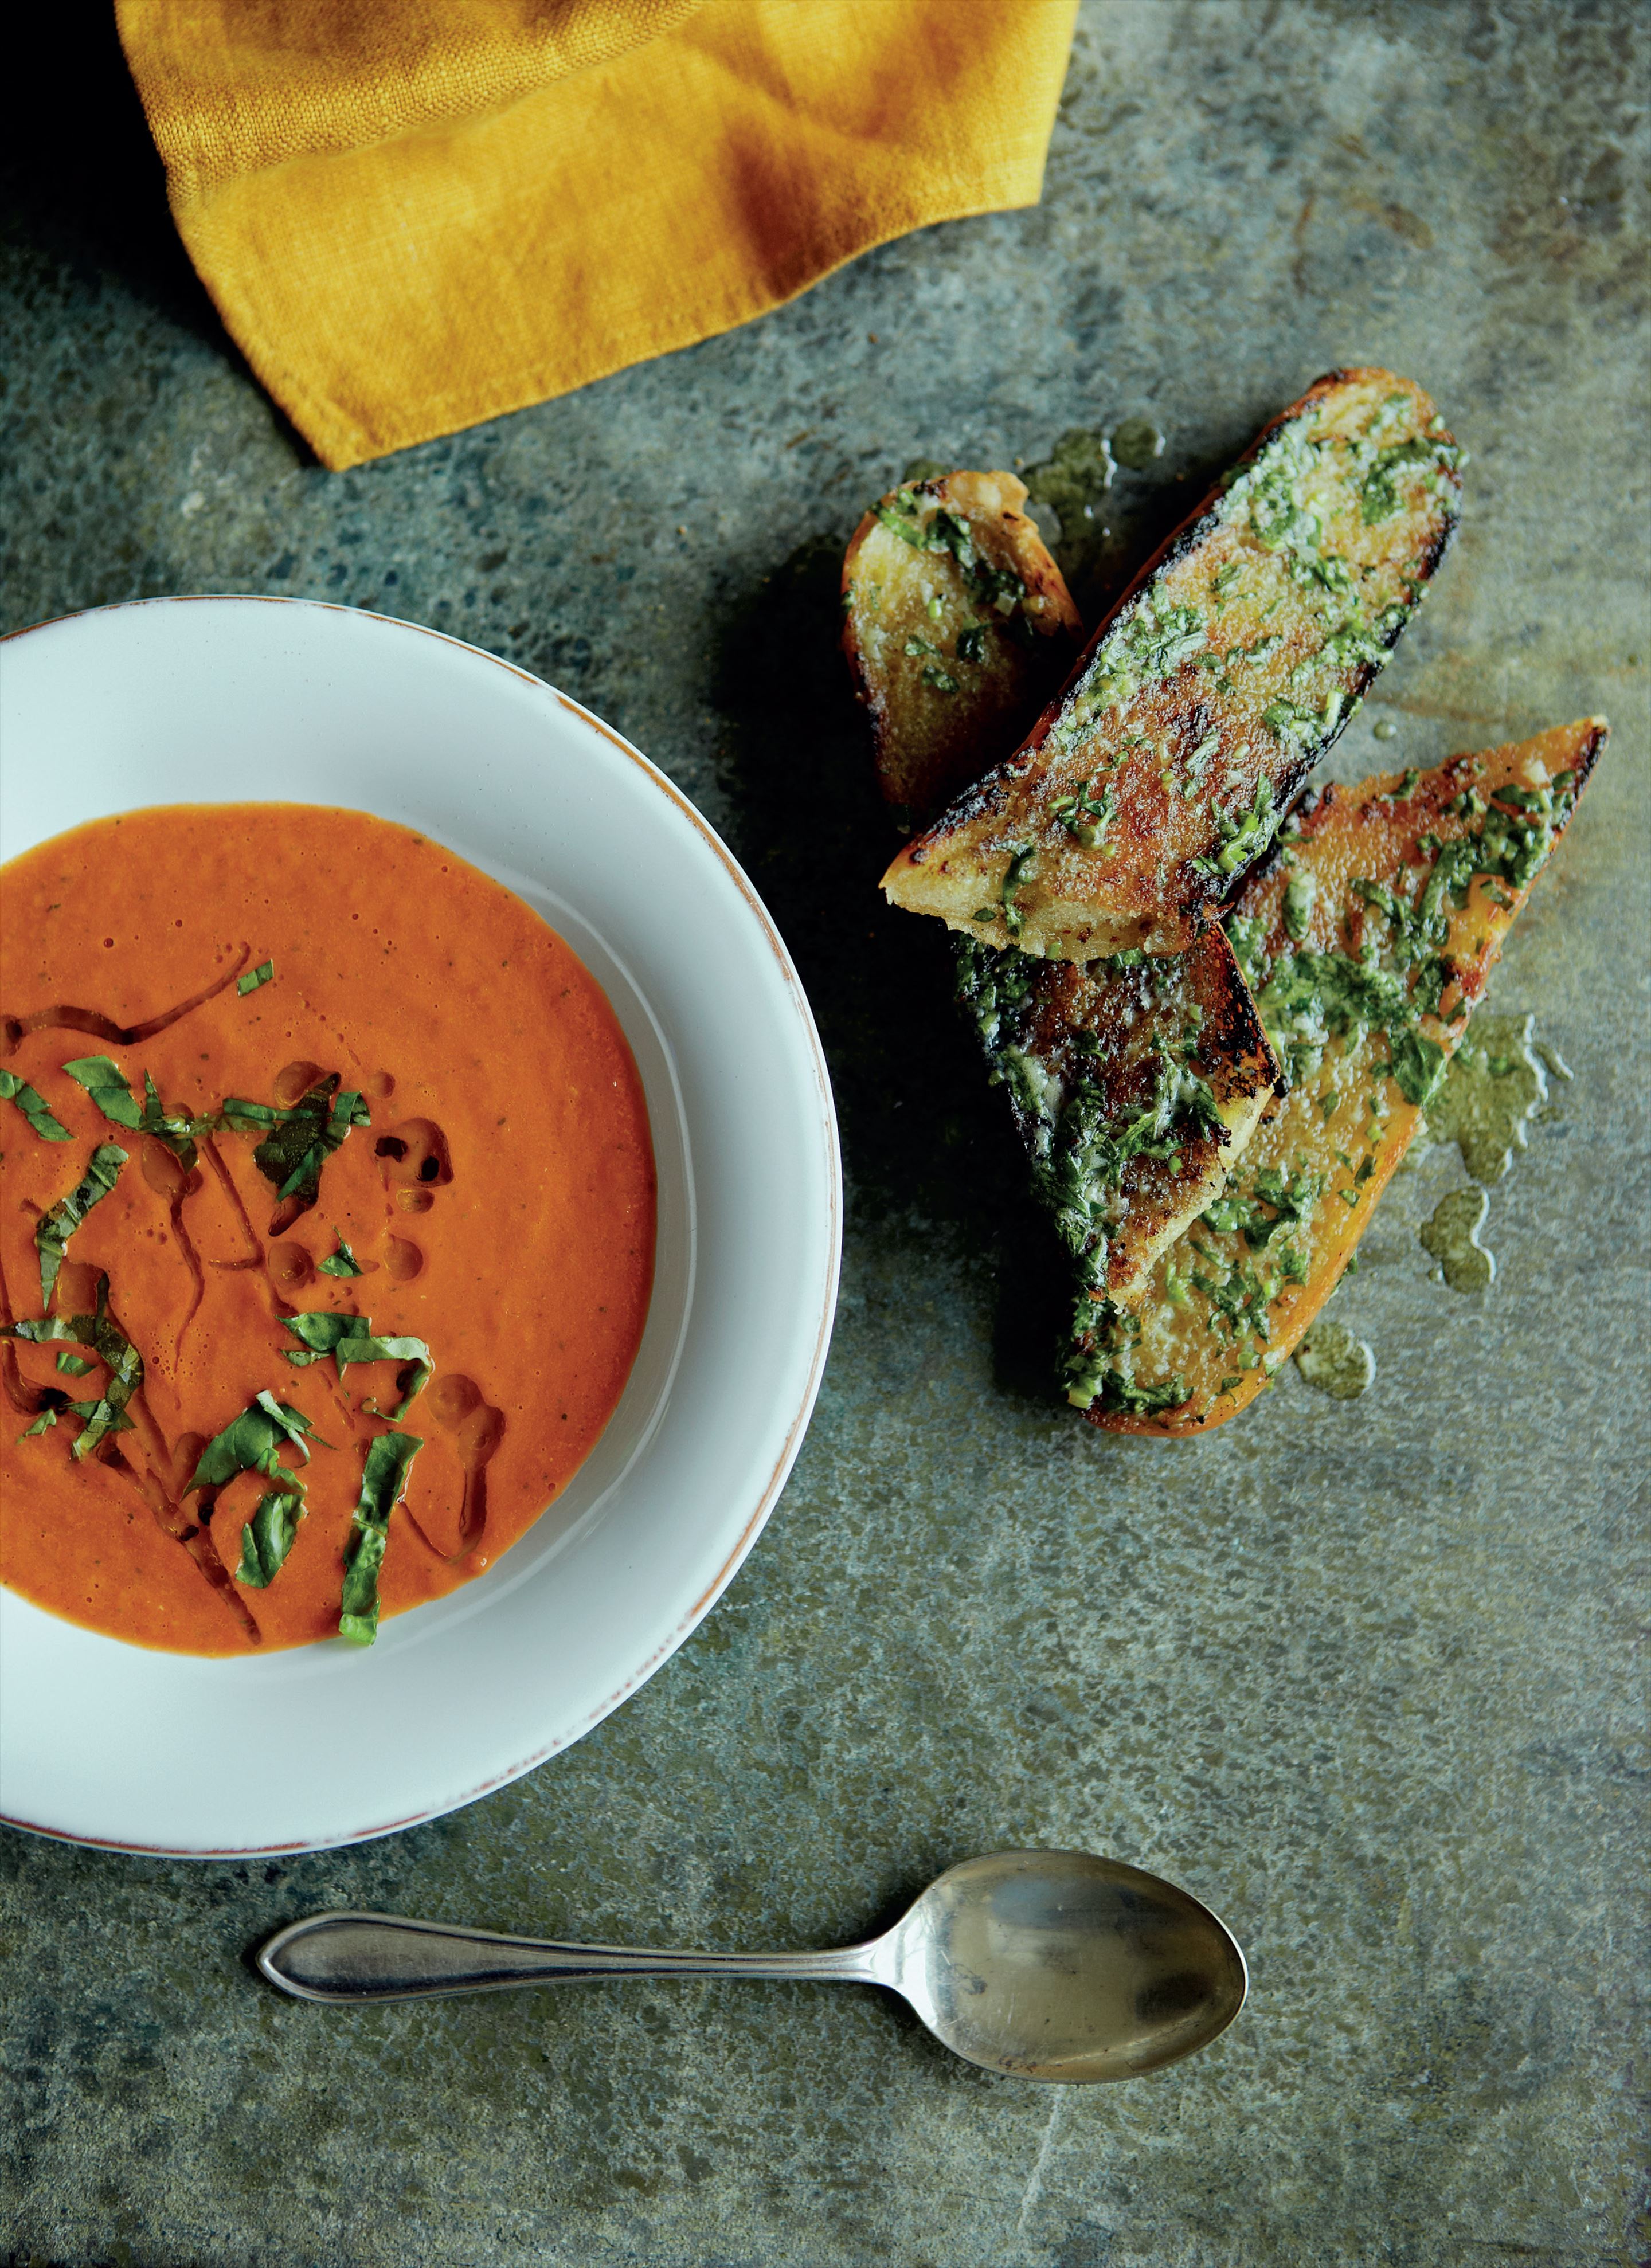 Quick tomato and basil soup with roasted garlic bread